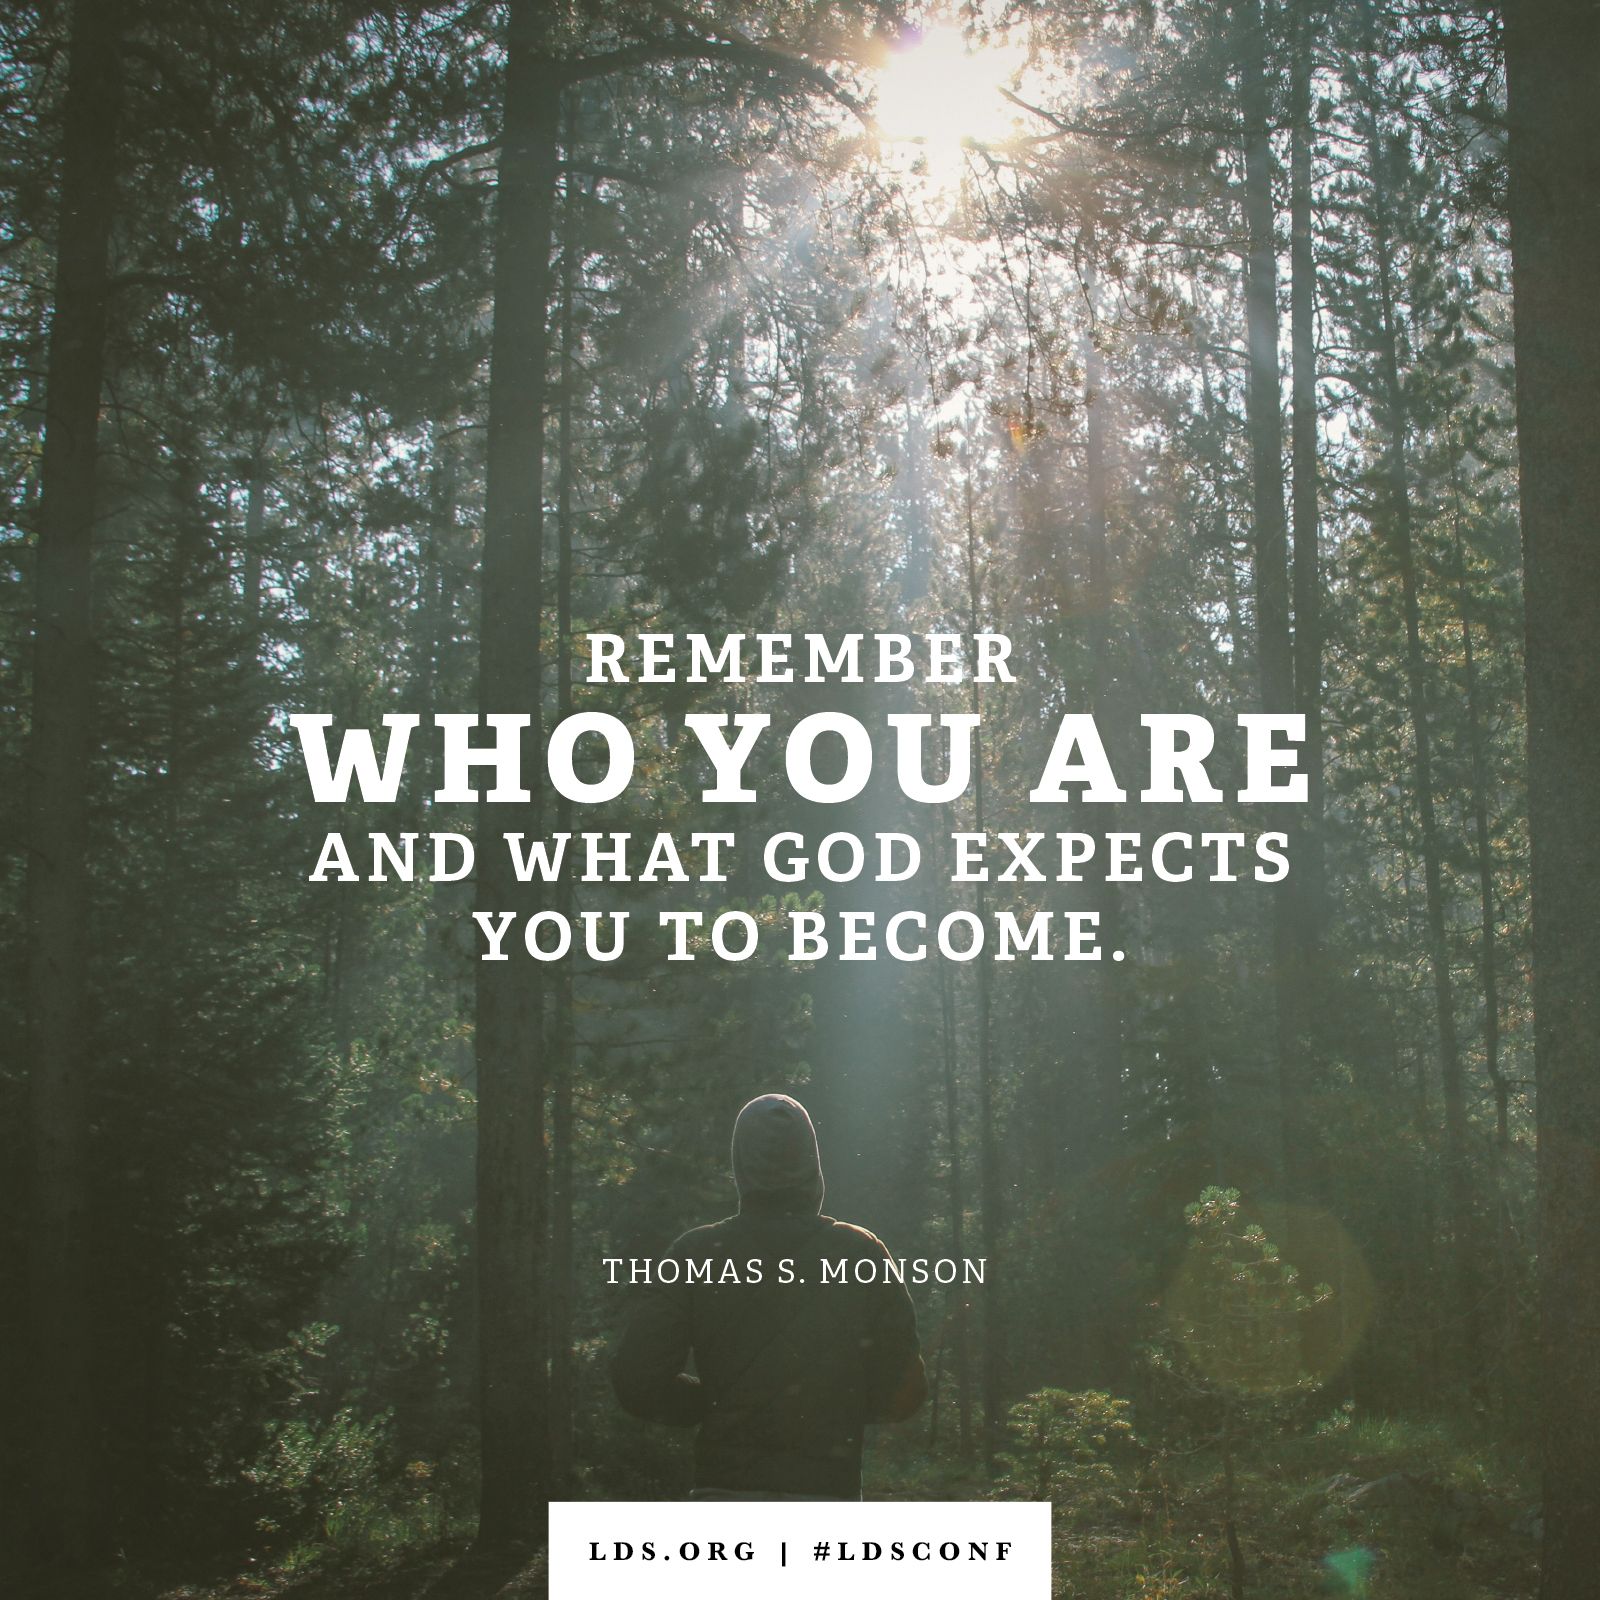 “Remember who you are and what God expects you to become.” —President Thomas S. Monson, “A Sacred Trust”